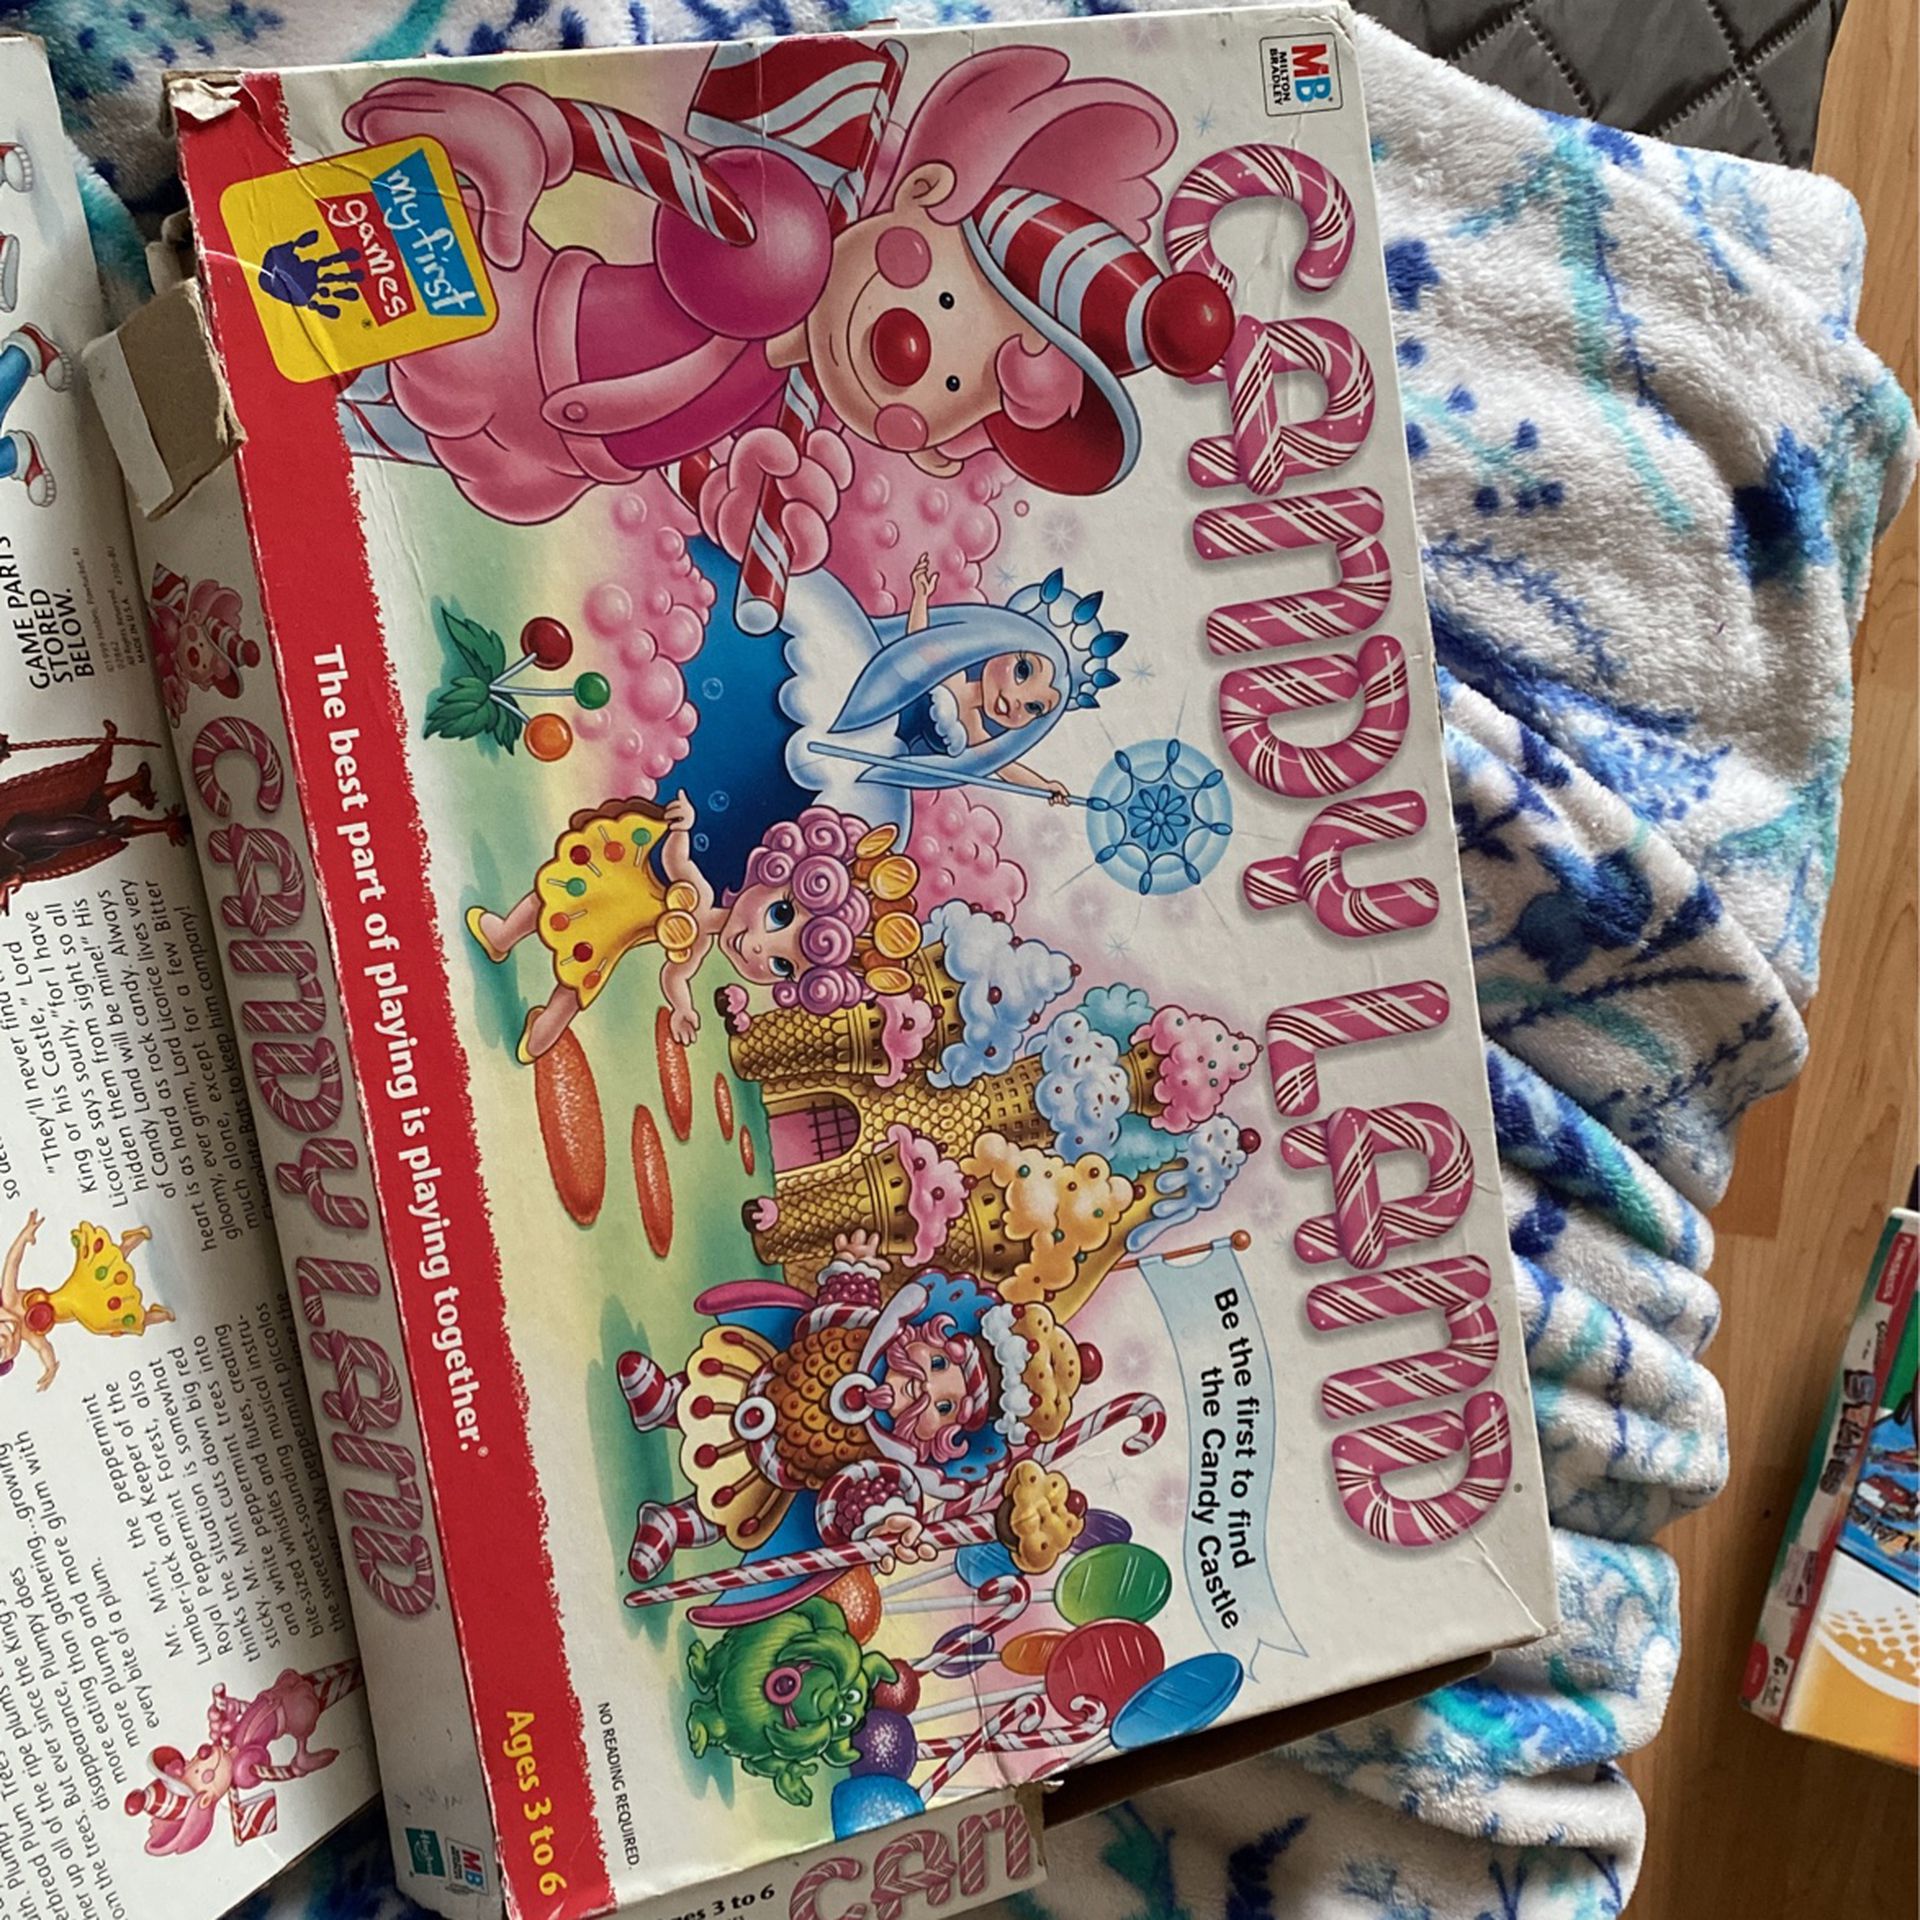 Candy Land Boardgame. Free If You Get Another Item